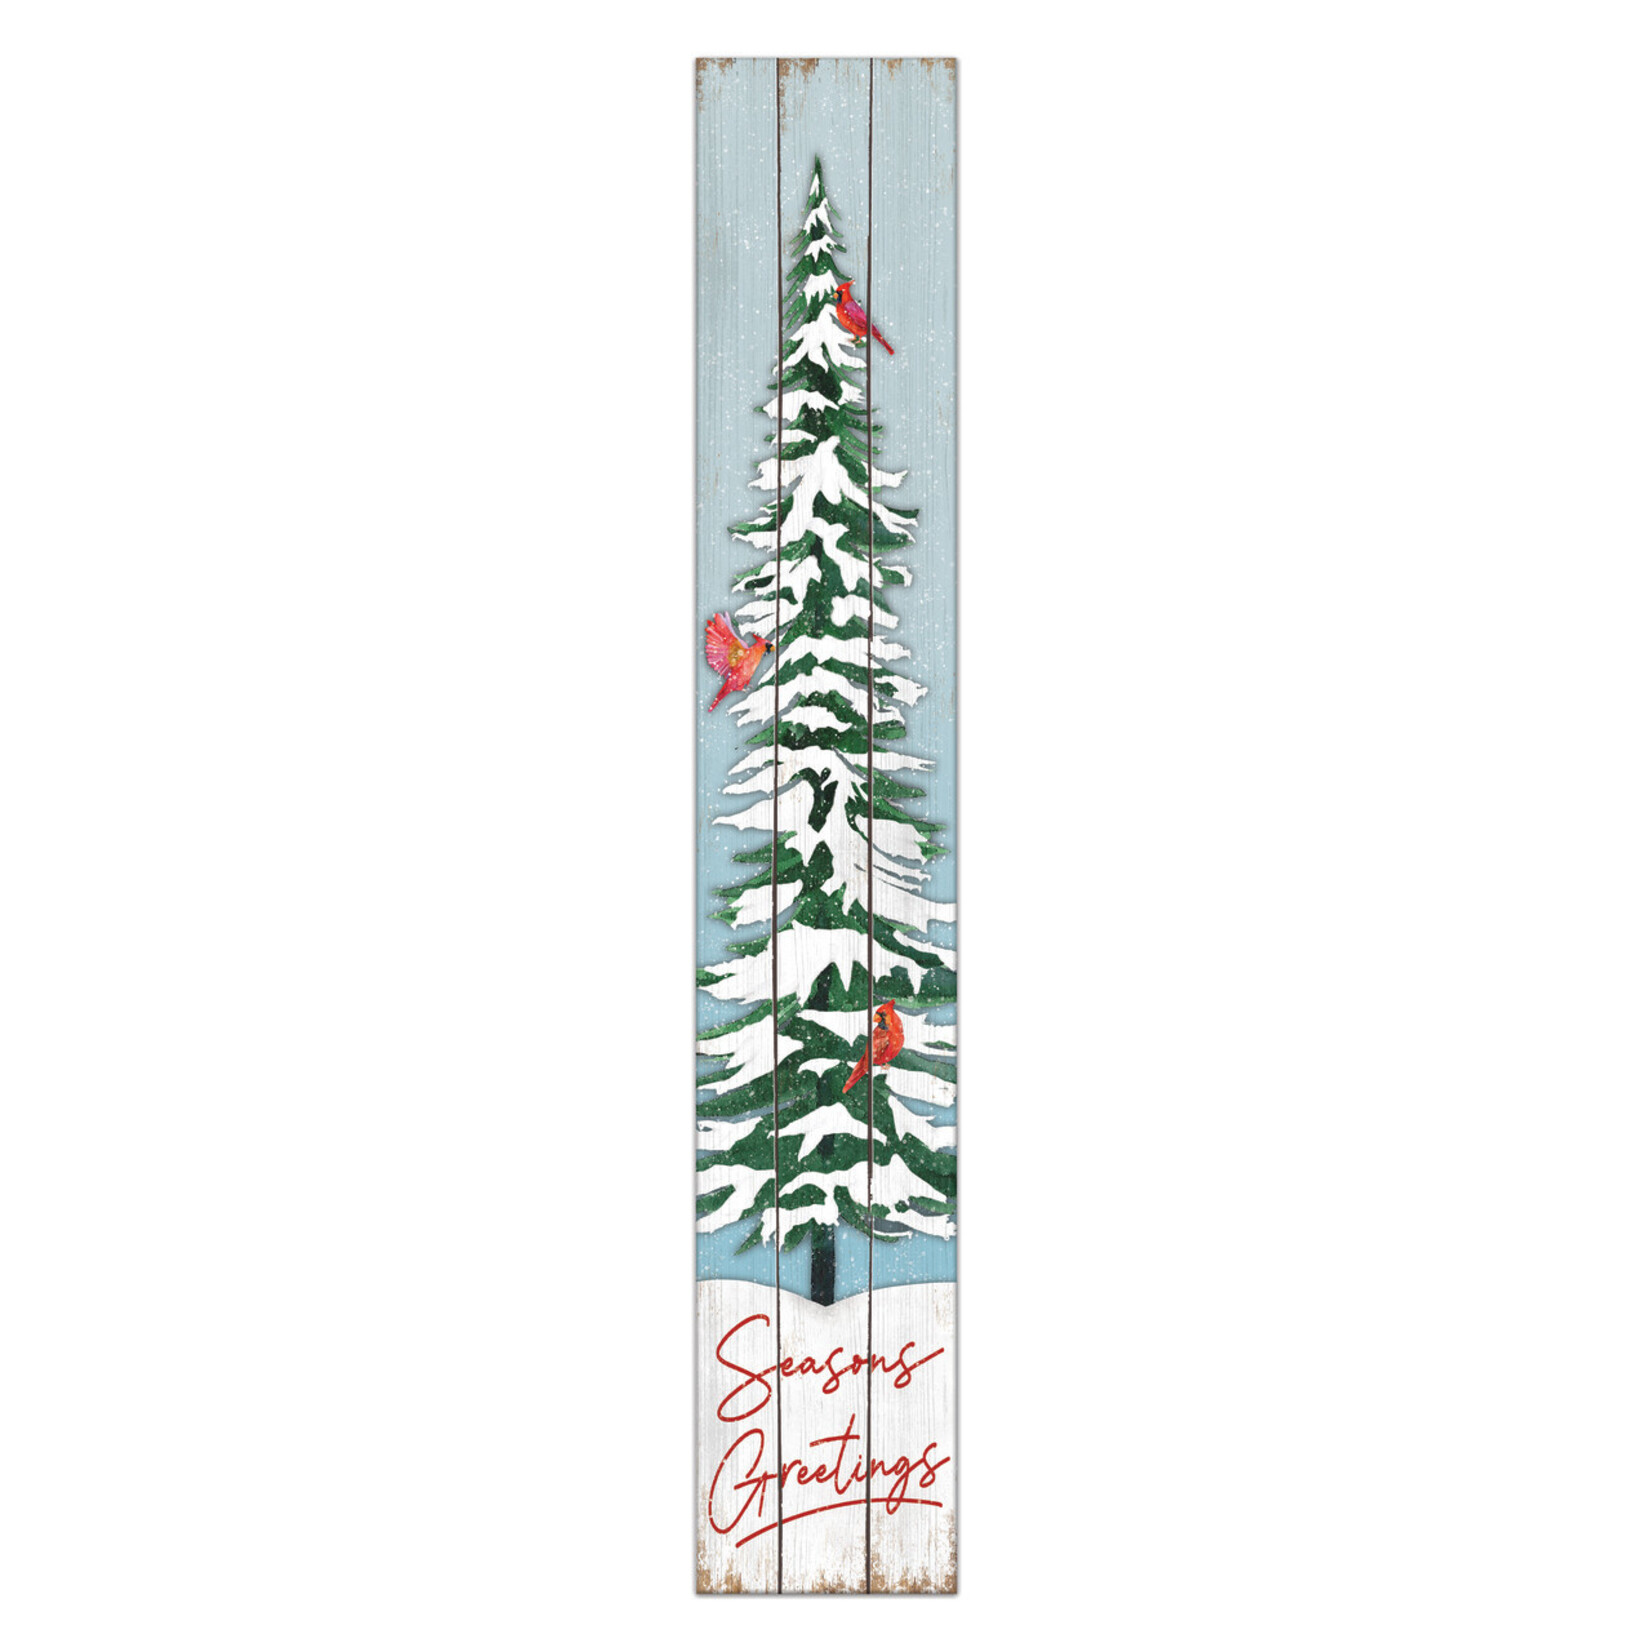 My Word! Seasons Greeting’s w/Tree & Cardinals Porch Board Sign